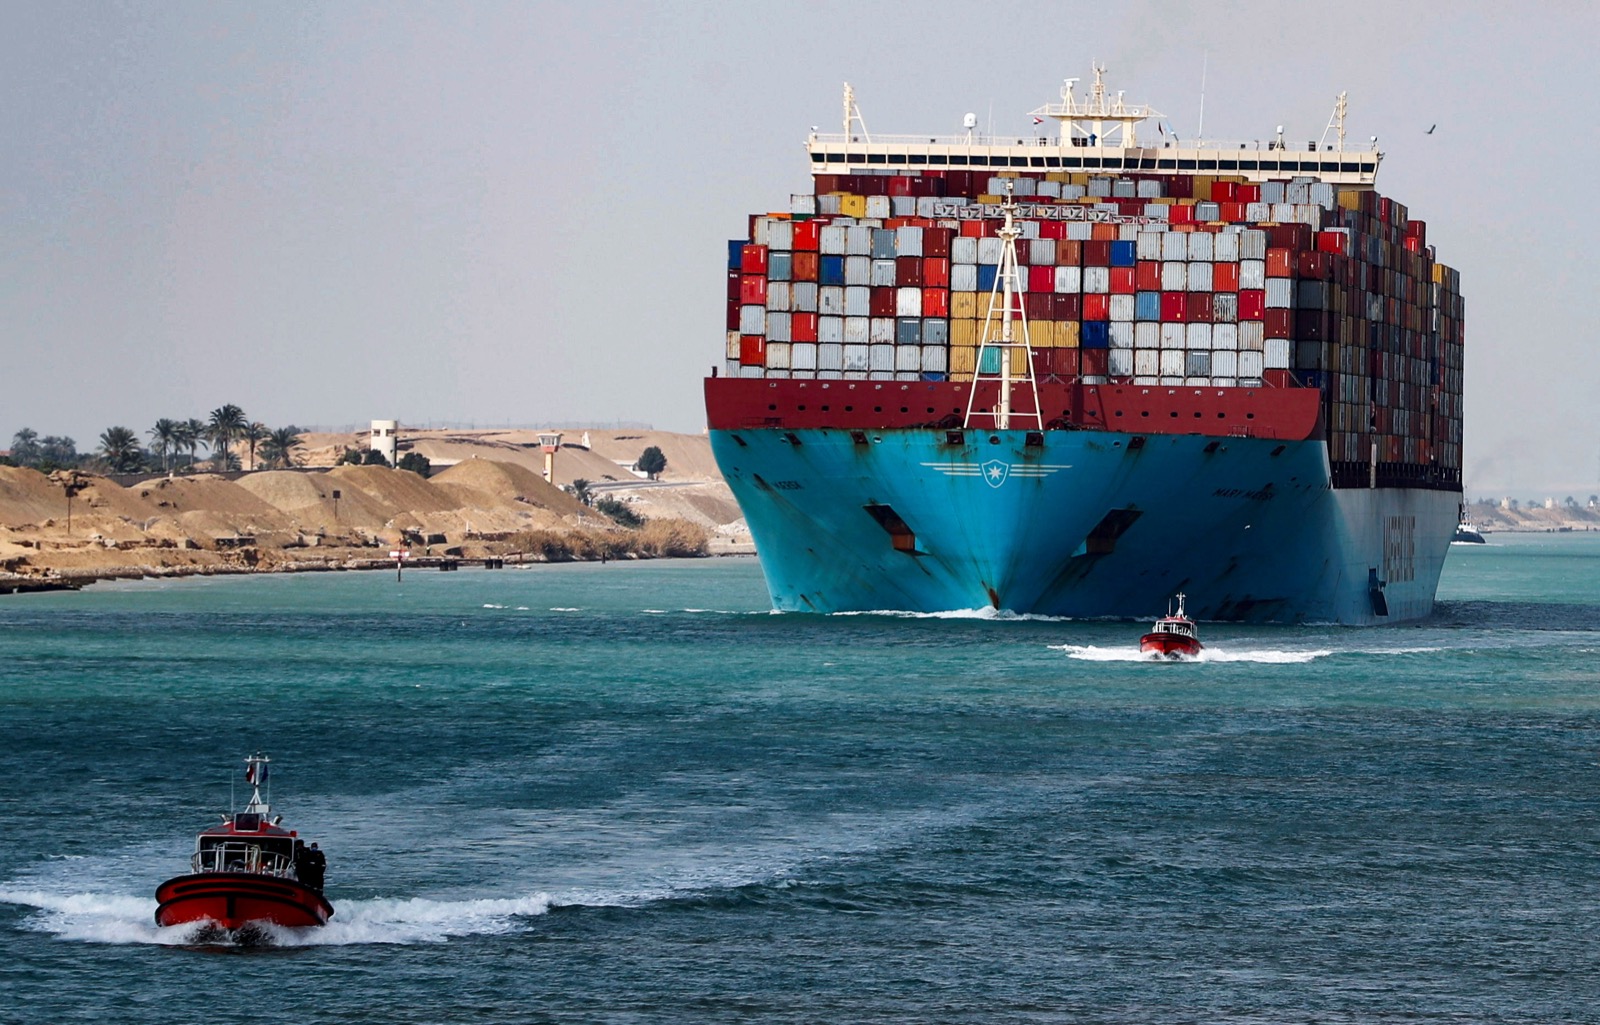 🚢 Journey Around the World in 24 Questions – How Well Can You Score? A shipping container passes through the Suez Canal in Suez